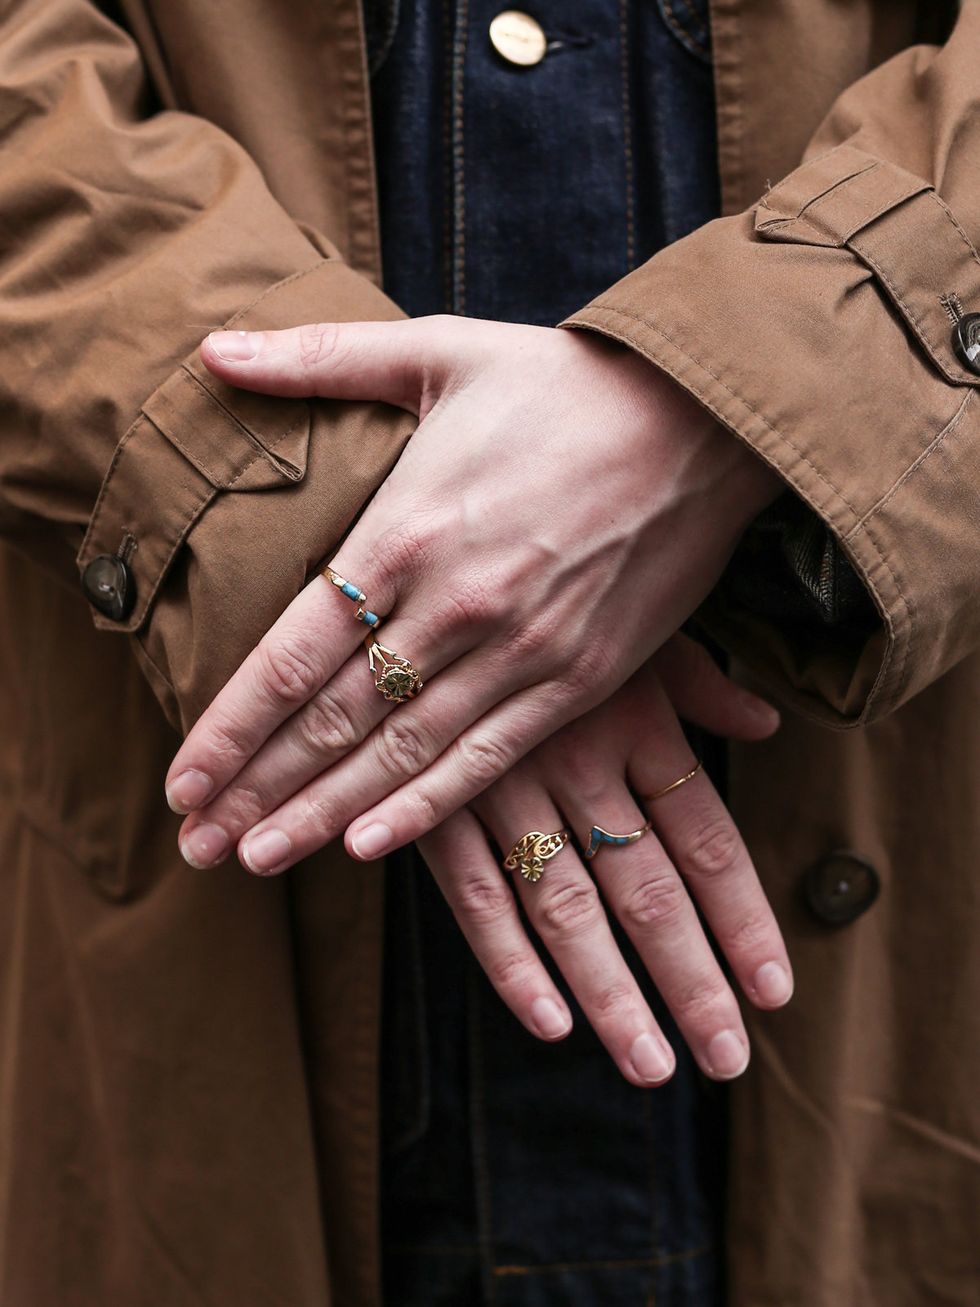 Hand, Outerwear, Finger, Jacket, Nail, Gesture, Interaction, Beige, Coat, Fashion accessory, 